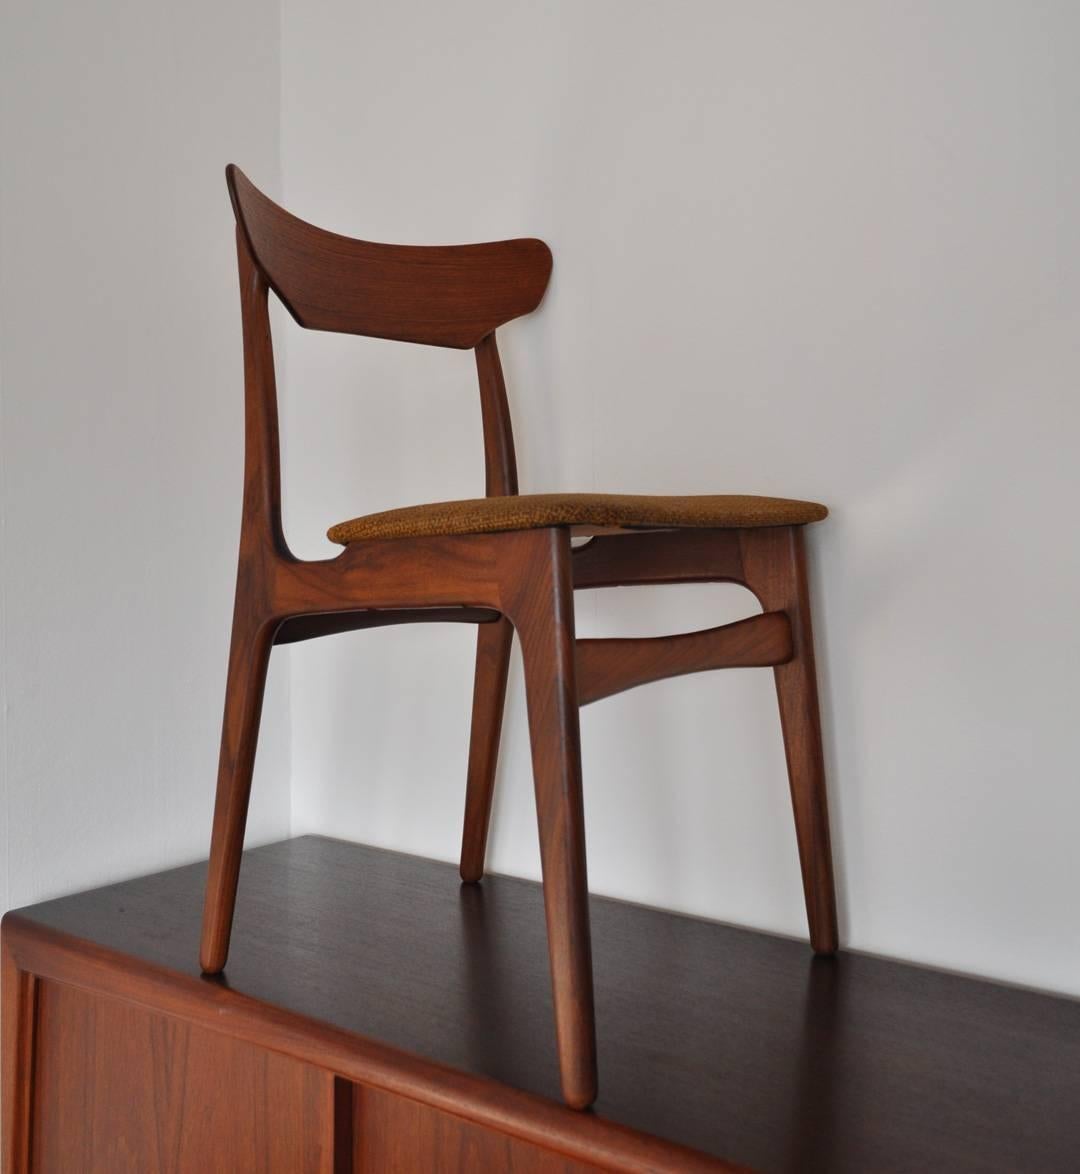 Set of two teak wood dining chairs designed by Schiønning & Elgaard, Denmark during the 1960s. Solid frames and backrests, seats covered with original upholstery.

Dimensions:
Width 47 cm
Depth 48 cm
Height 78 cm
Seat height 46 cm.